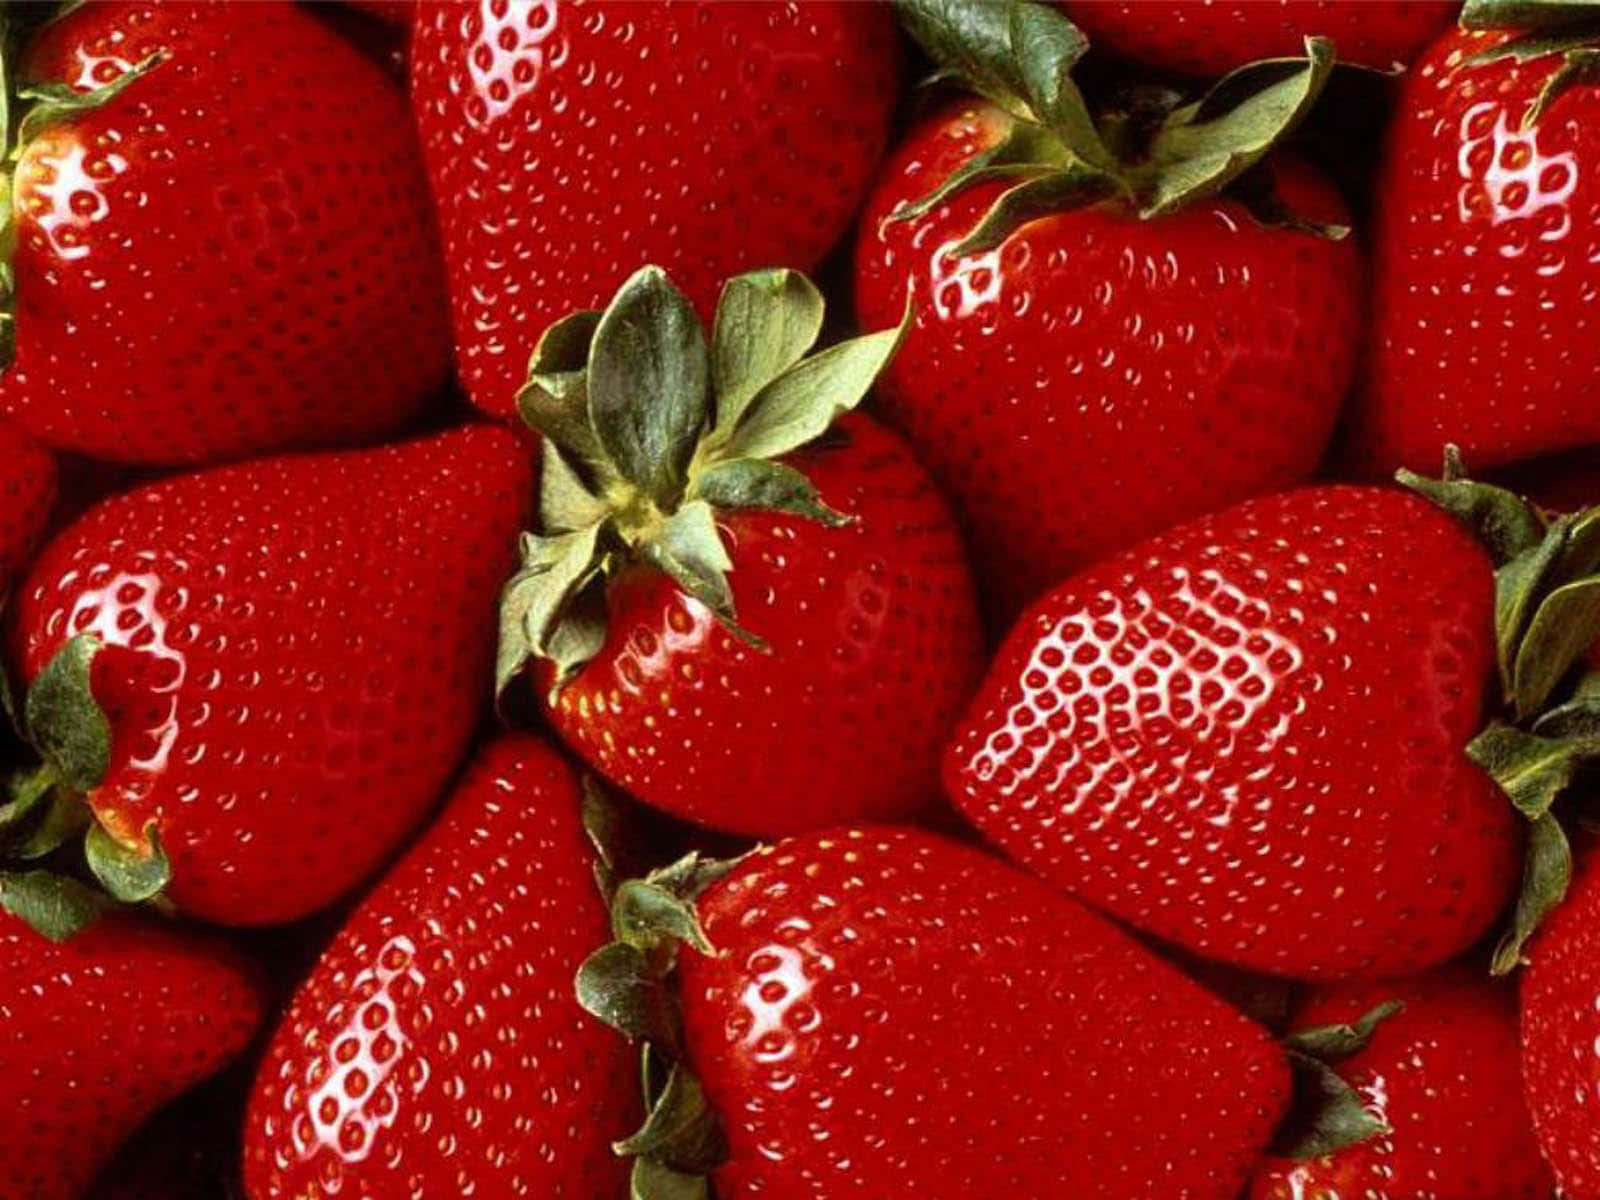 The sweet and juicy Allure of a Strawberry